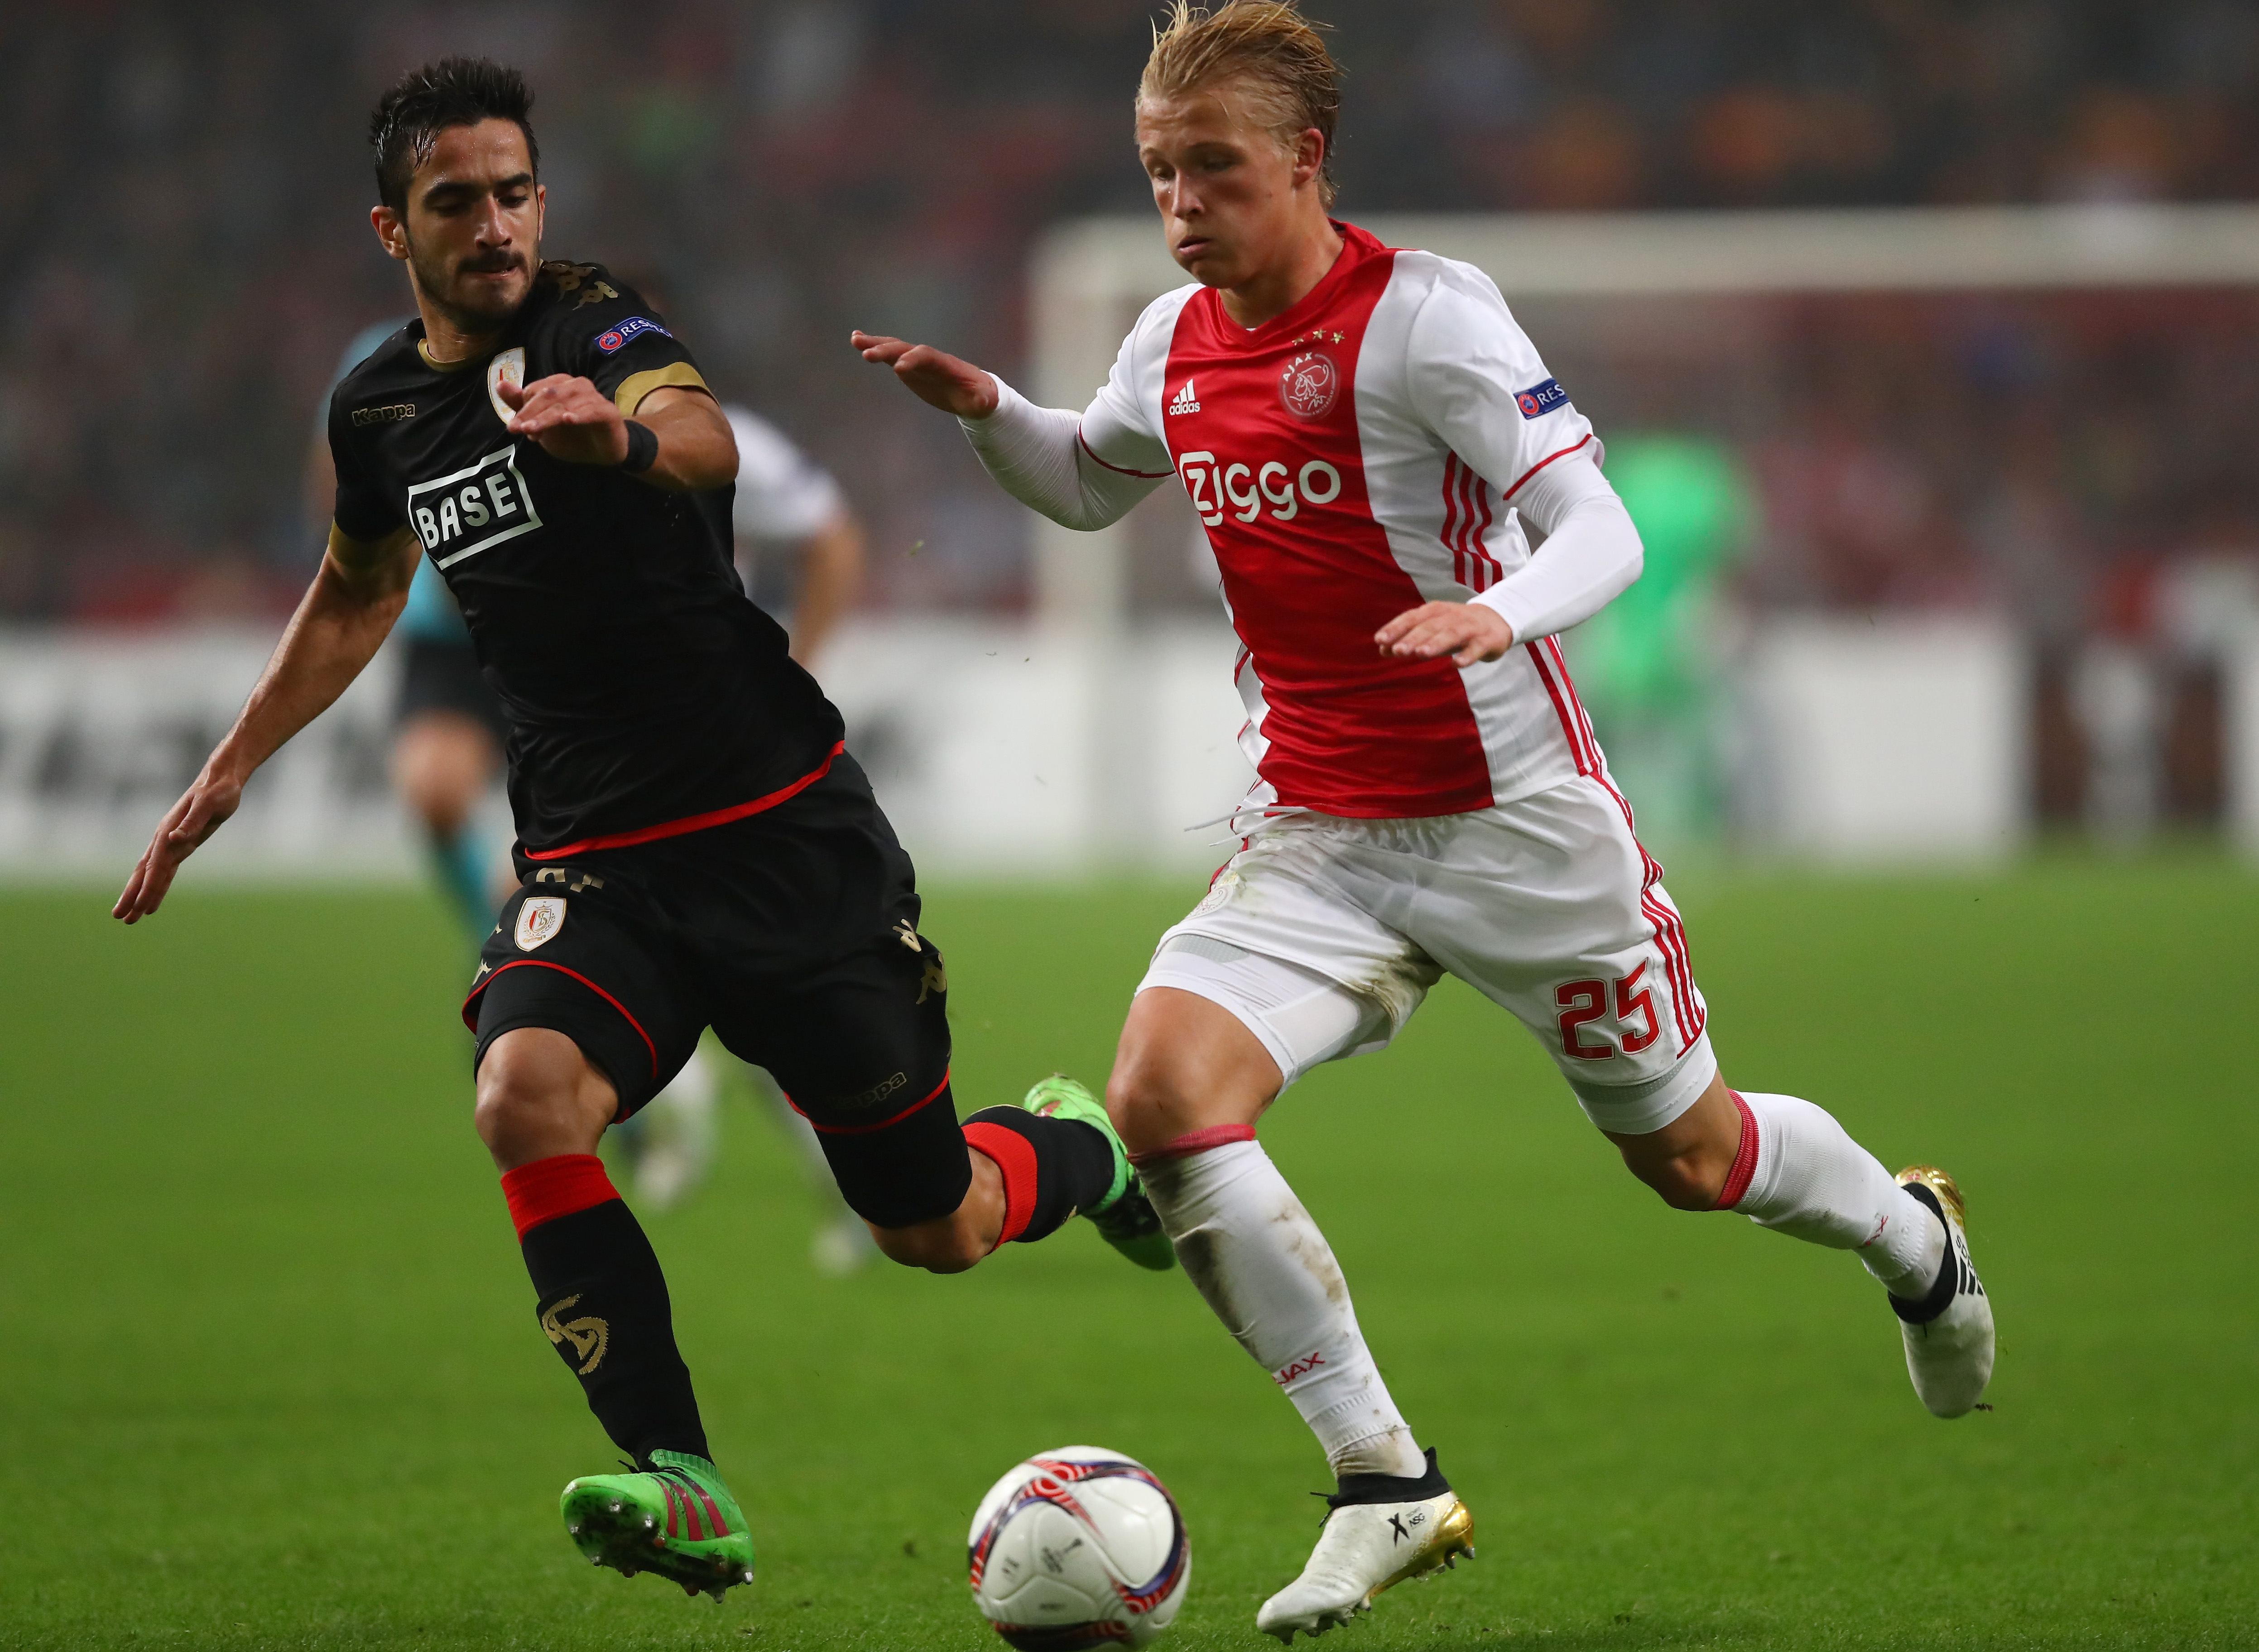 AMSTERDAM, NETHERLANDS - SEPTEMBER 29:  Kasper Dolberg of Ajax is closed down by Konstantinos Laifis of Standard Liege during the UEFA Europa League group G match between AFC Ajax and  R. Standard de Liege at the Amsterdam Arena on September 29, 2016 in Amsterdam, Netherlands.  (Photo by Dean Mouhtaropoulos/Getty Images)